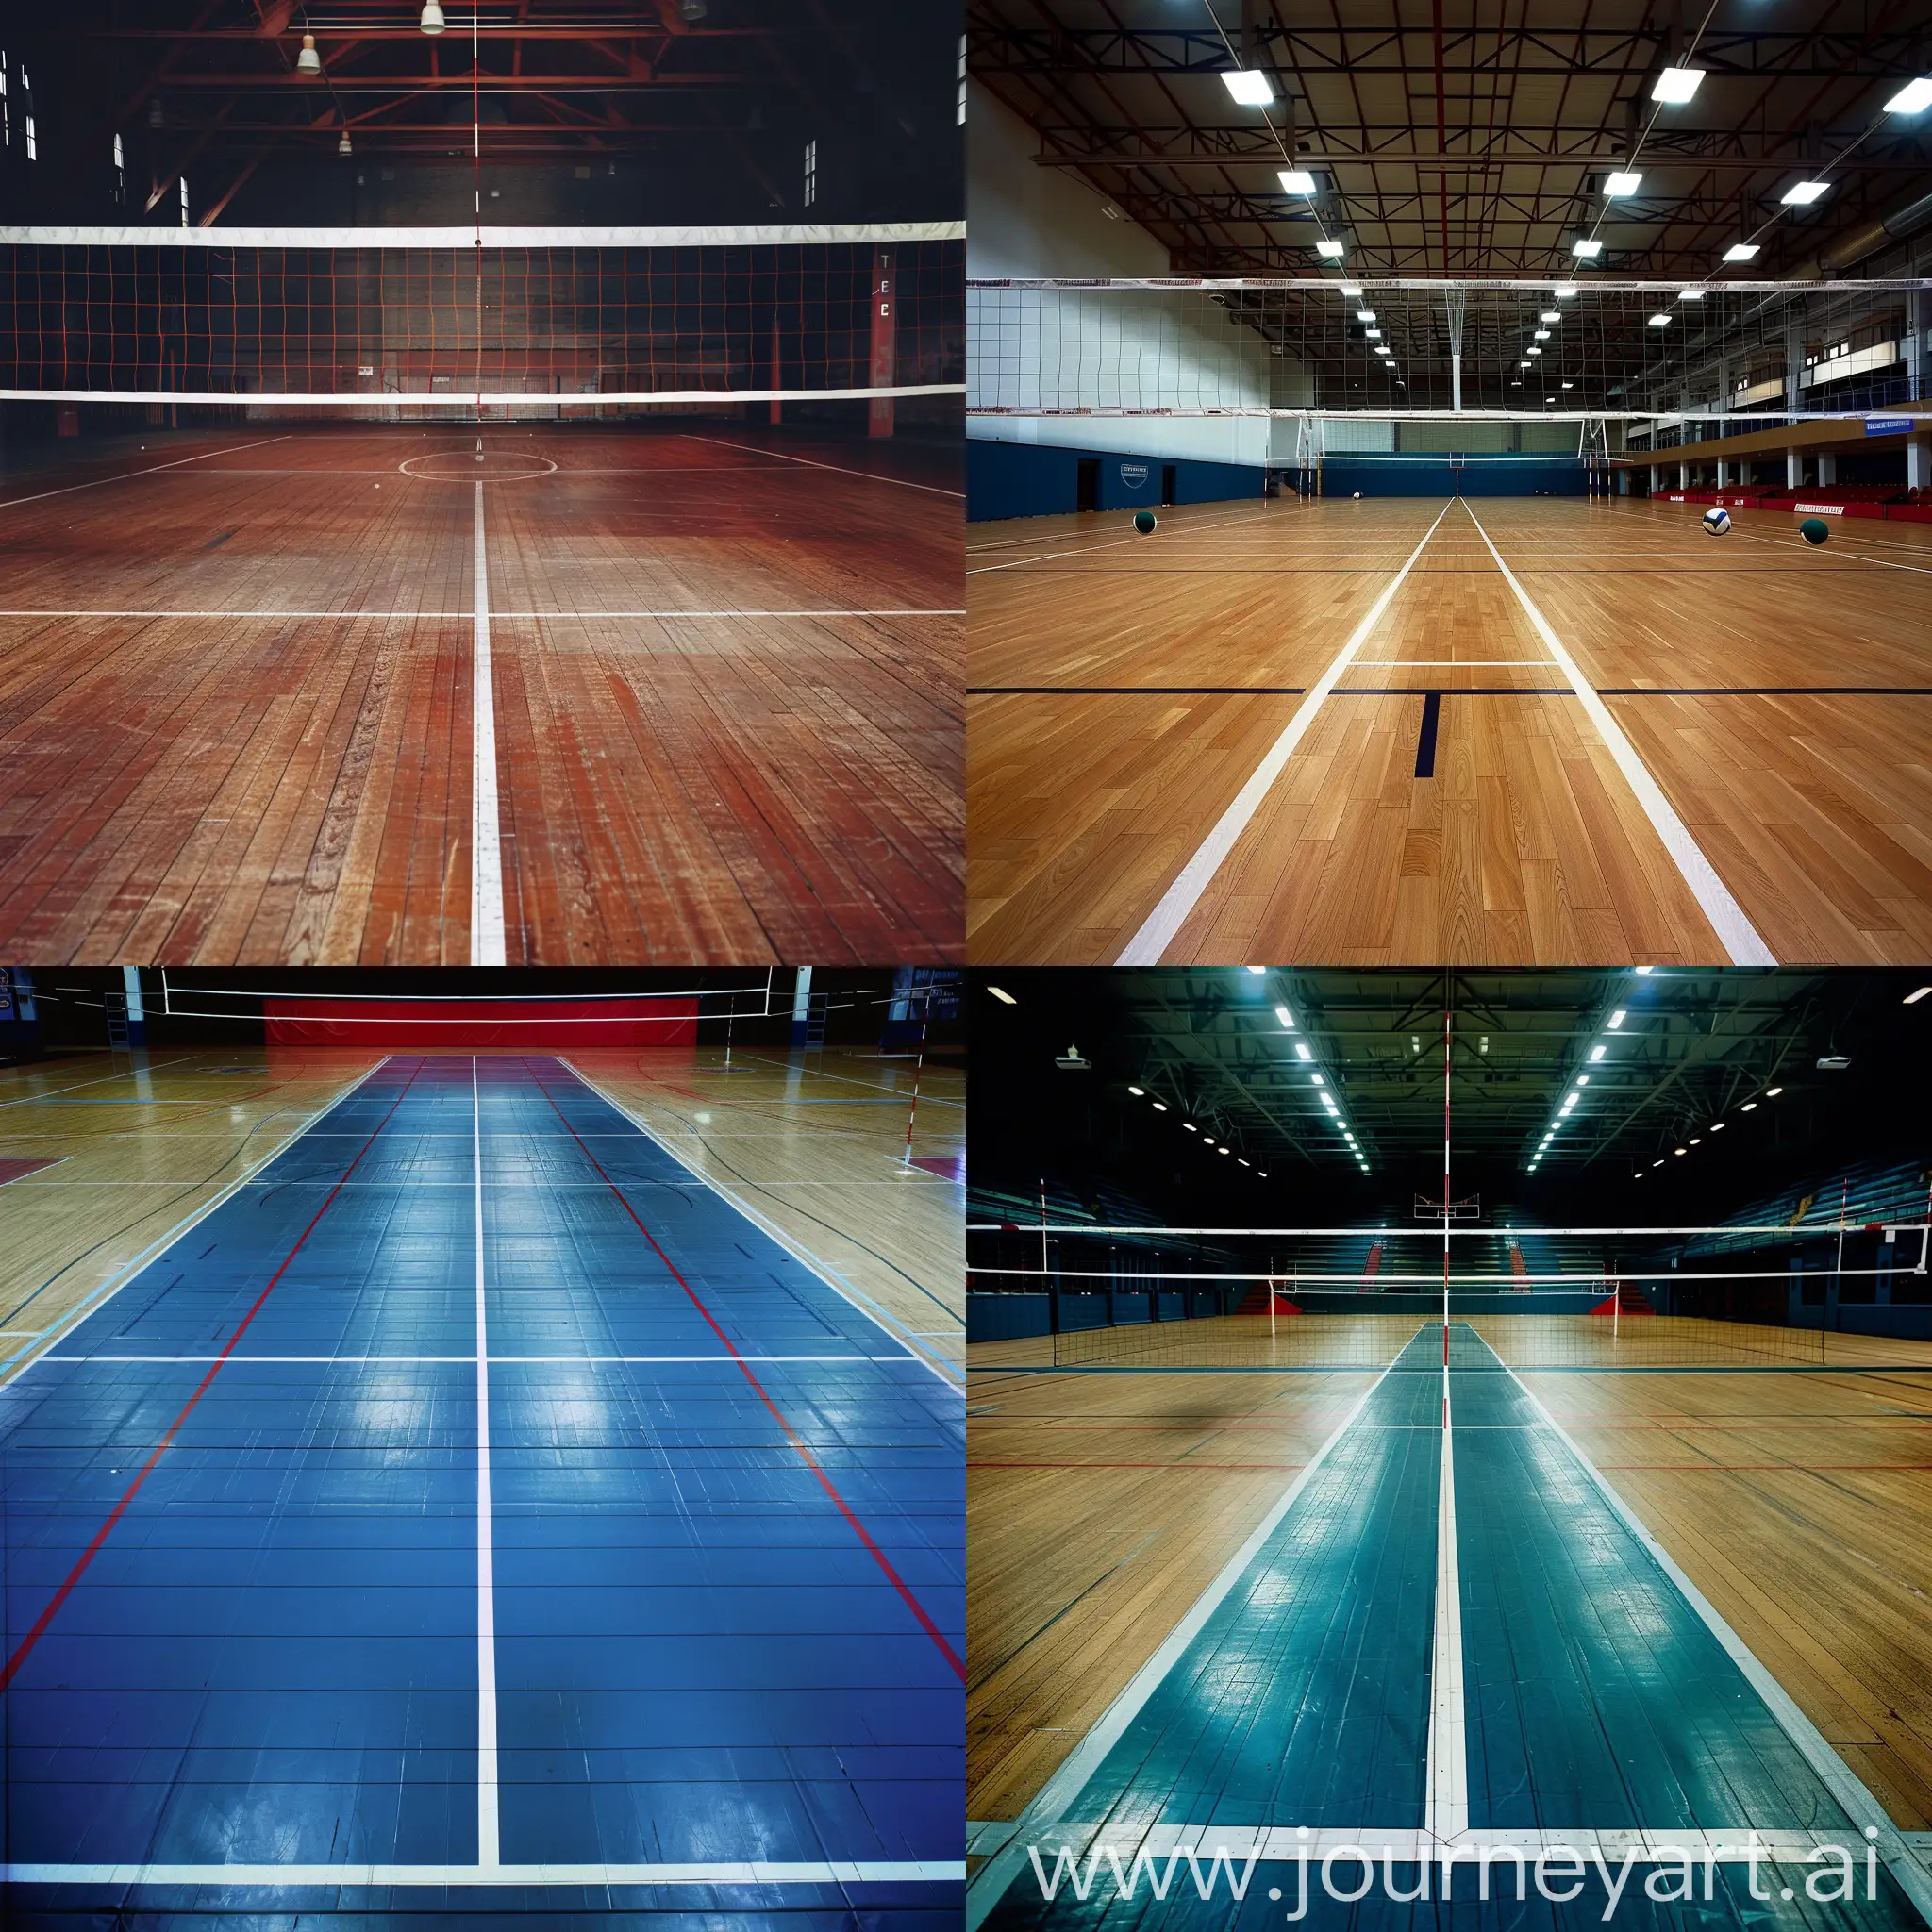 Dynamic-Volleyball-Action-on-a-11-Aspect-Ratio-Court-with-6-Players